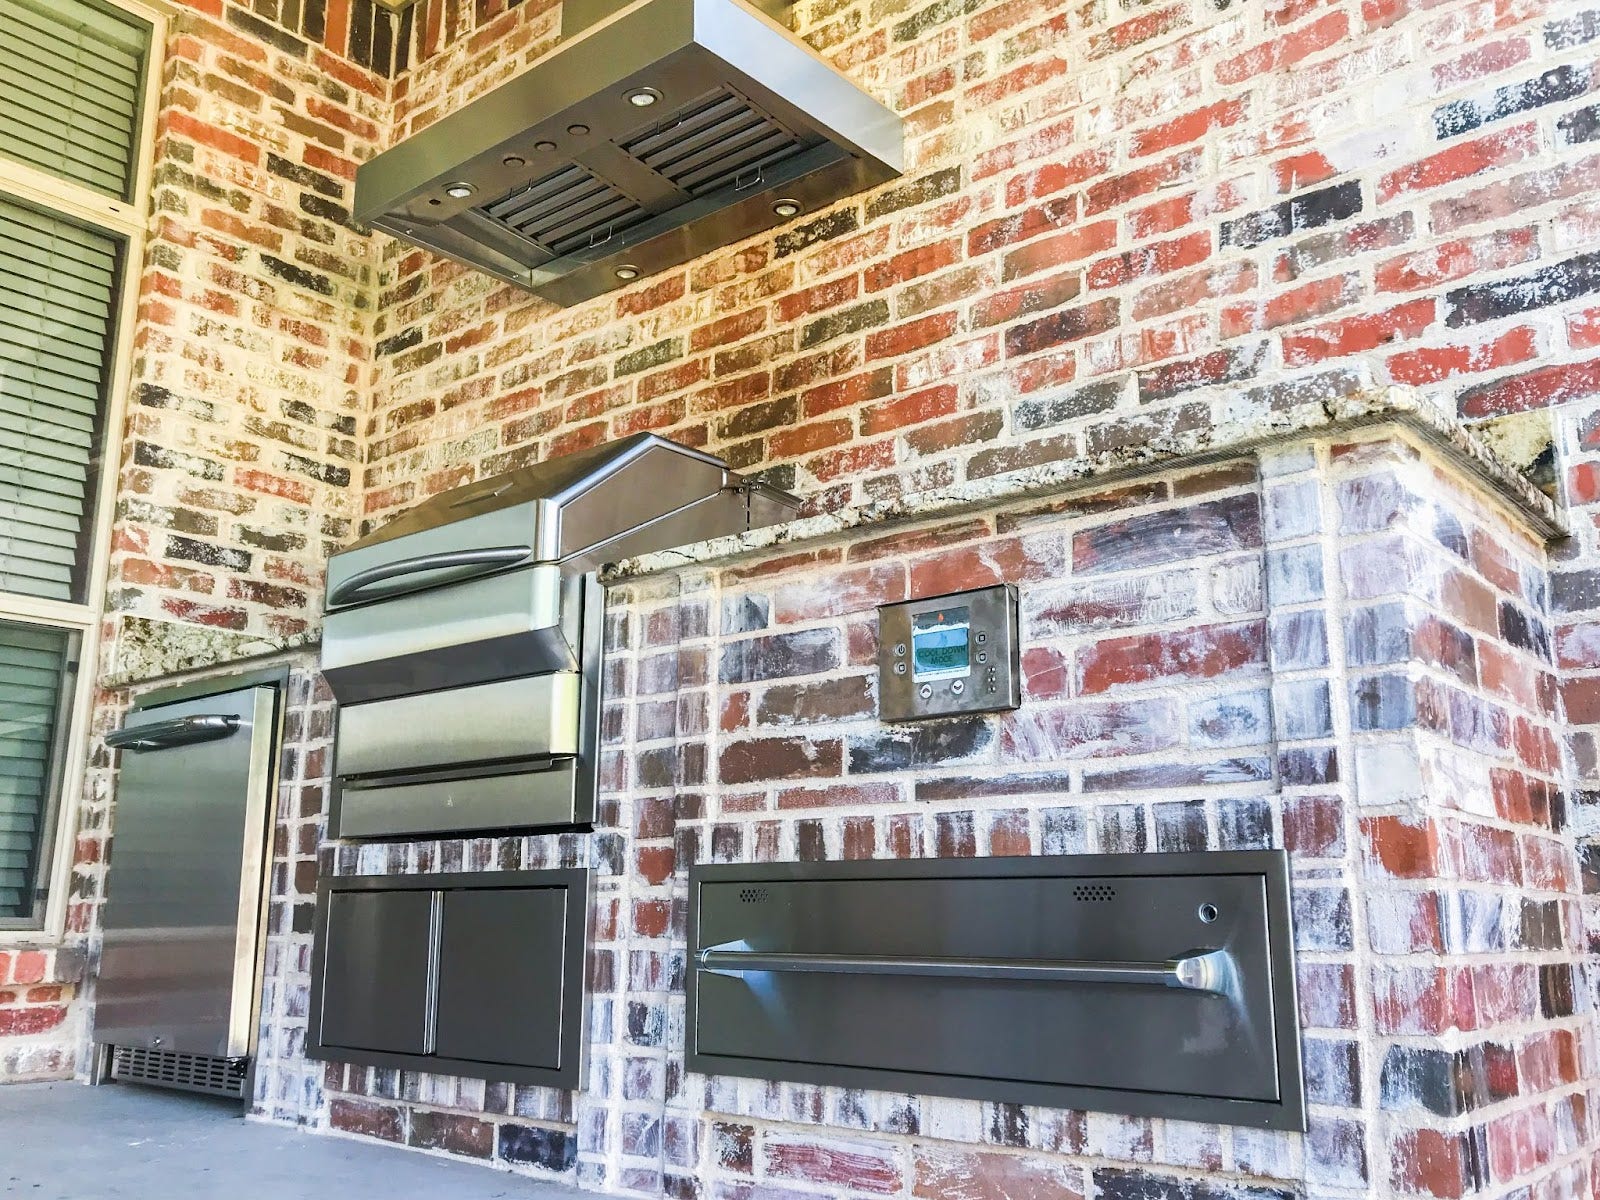 Spacious patio cooking area featuring a stainless steel Proline range hood against a multi-colored brick backdrop - prolinerangehoods.com